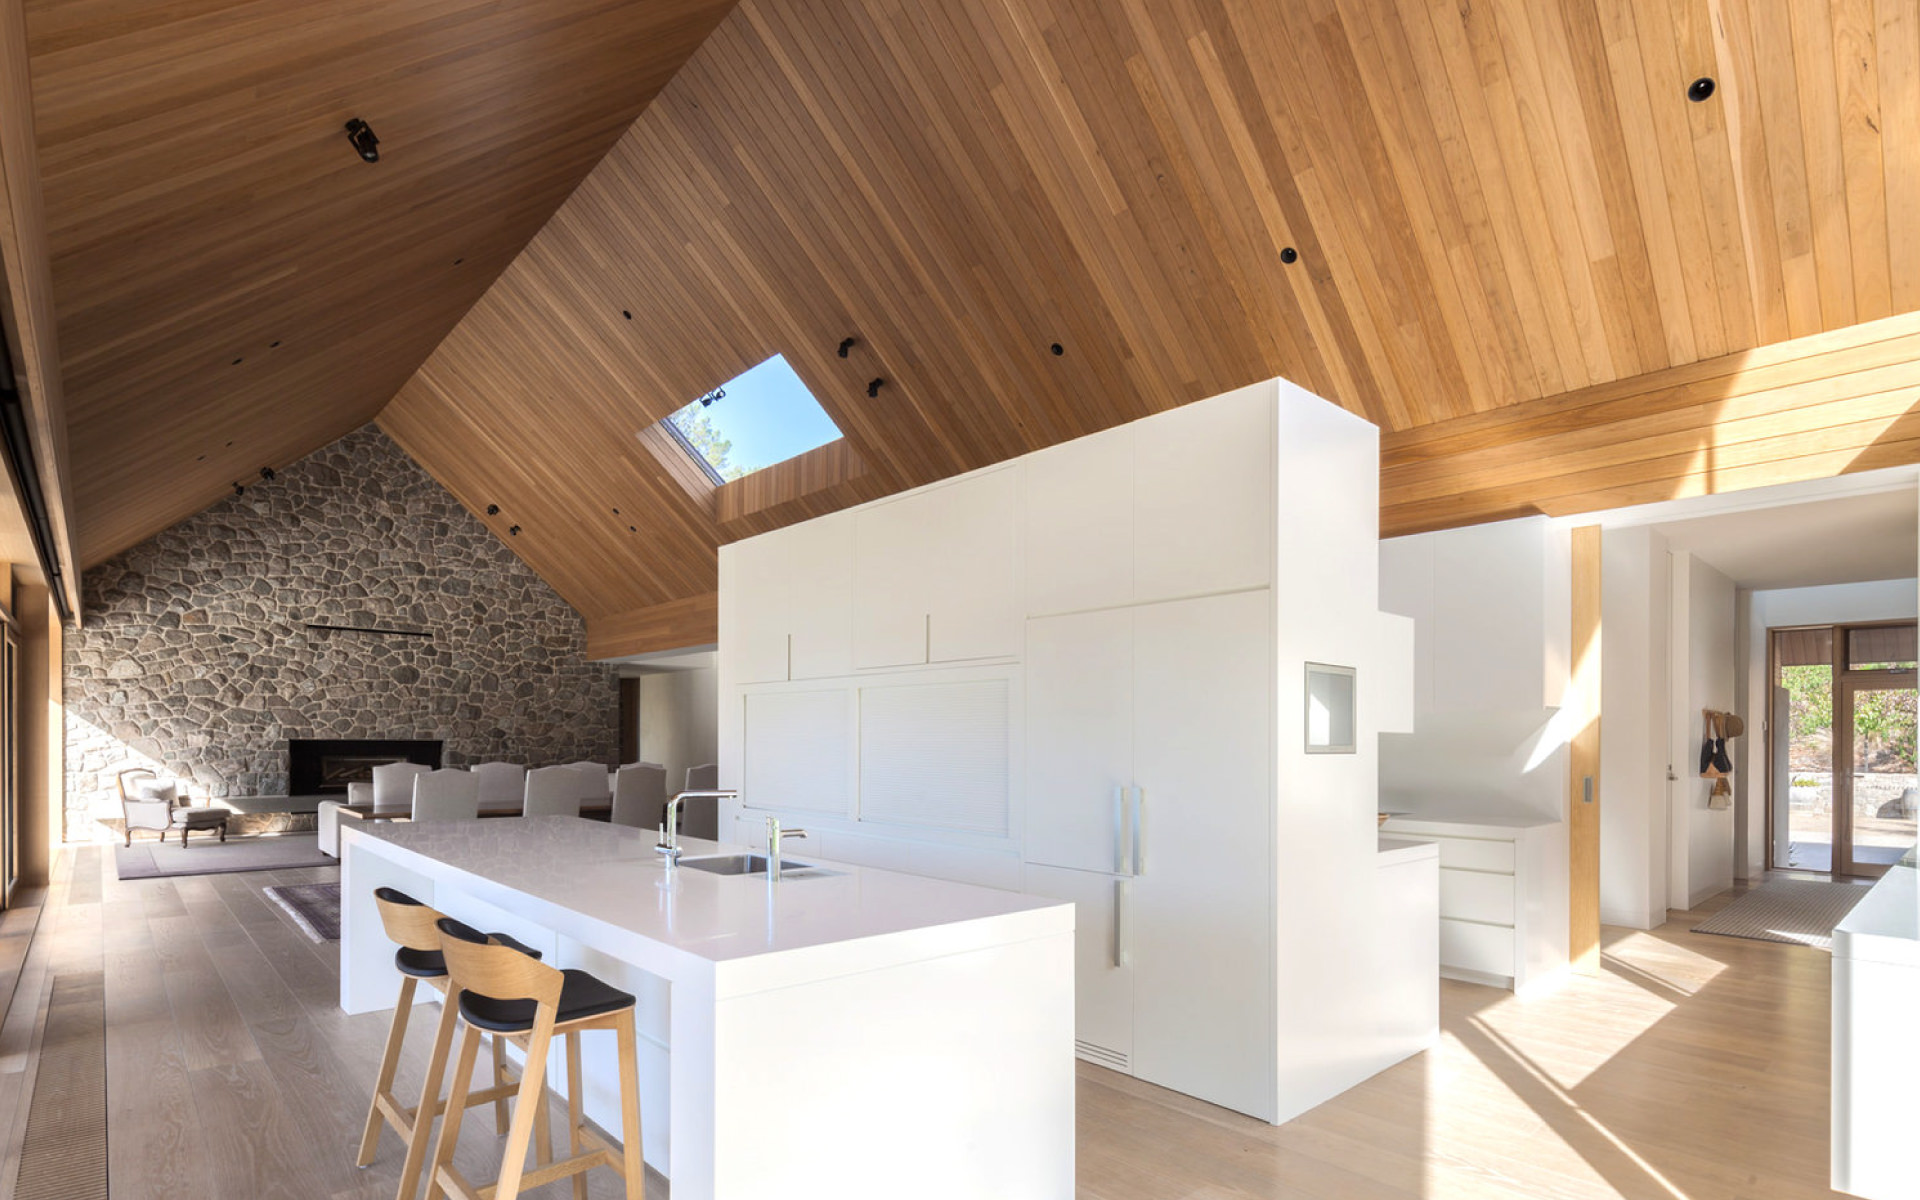 Prime Building Surveyors Red Hill Residence kitchen and dining